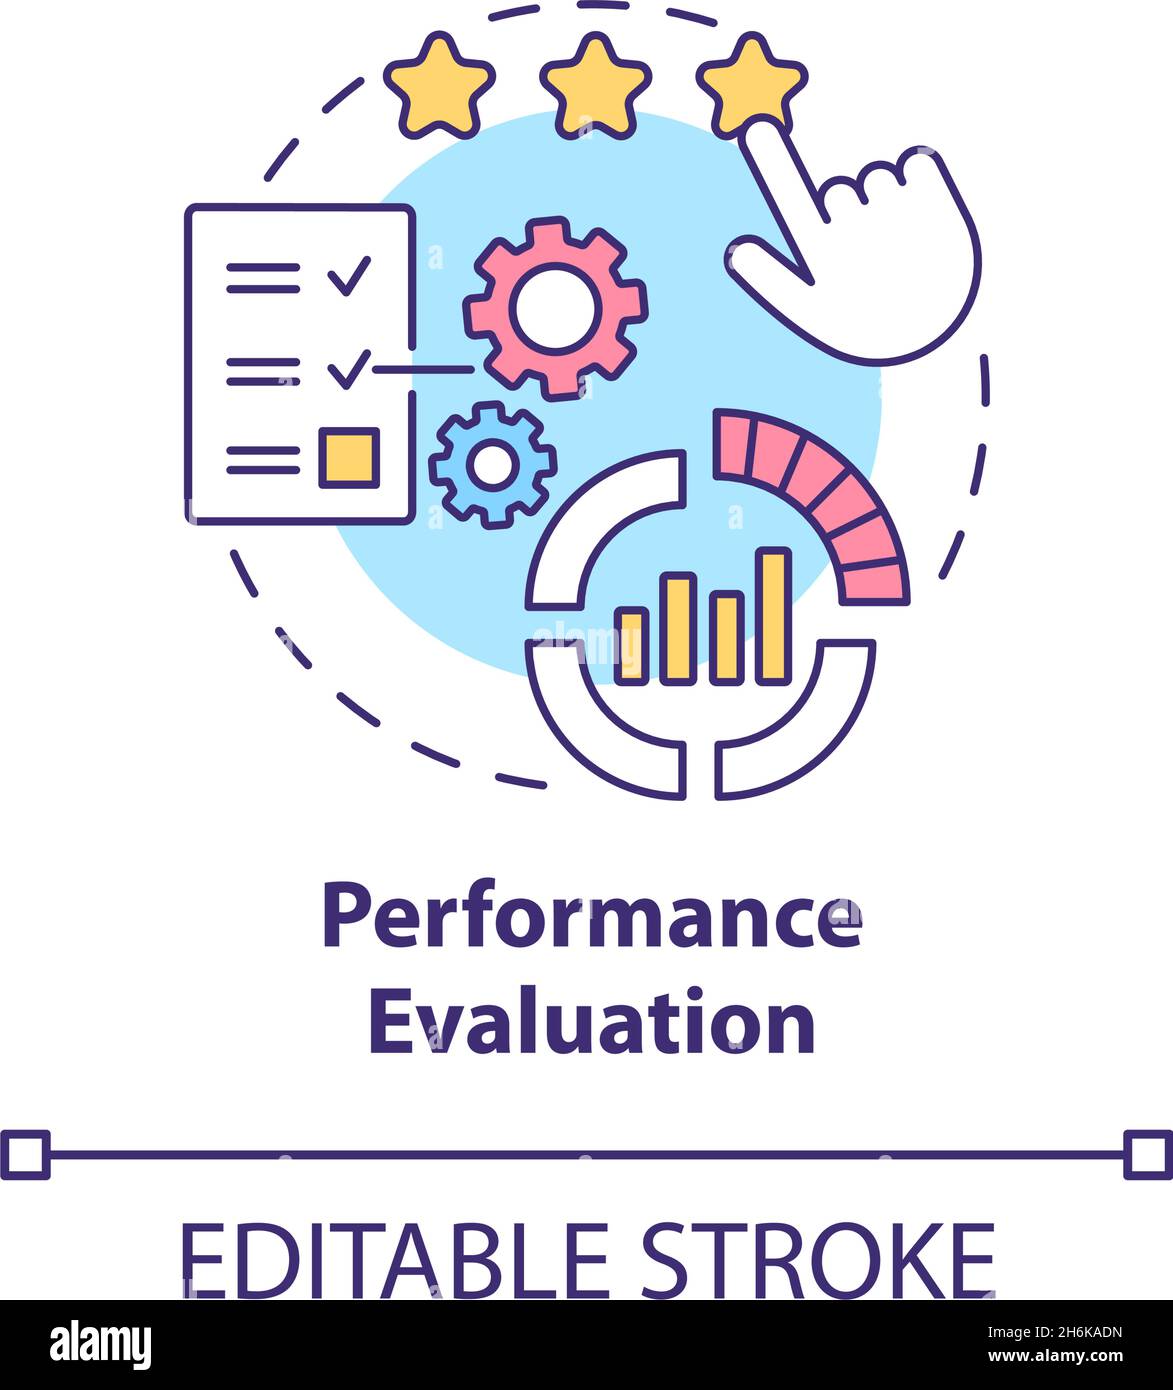 Performance evaluation concept icon Stock Vector